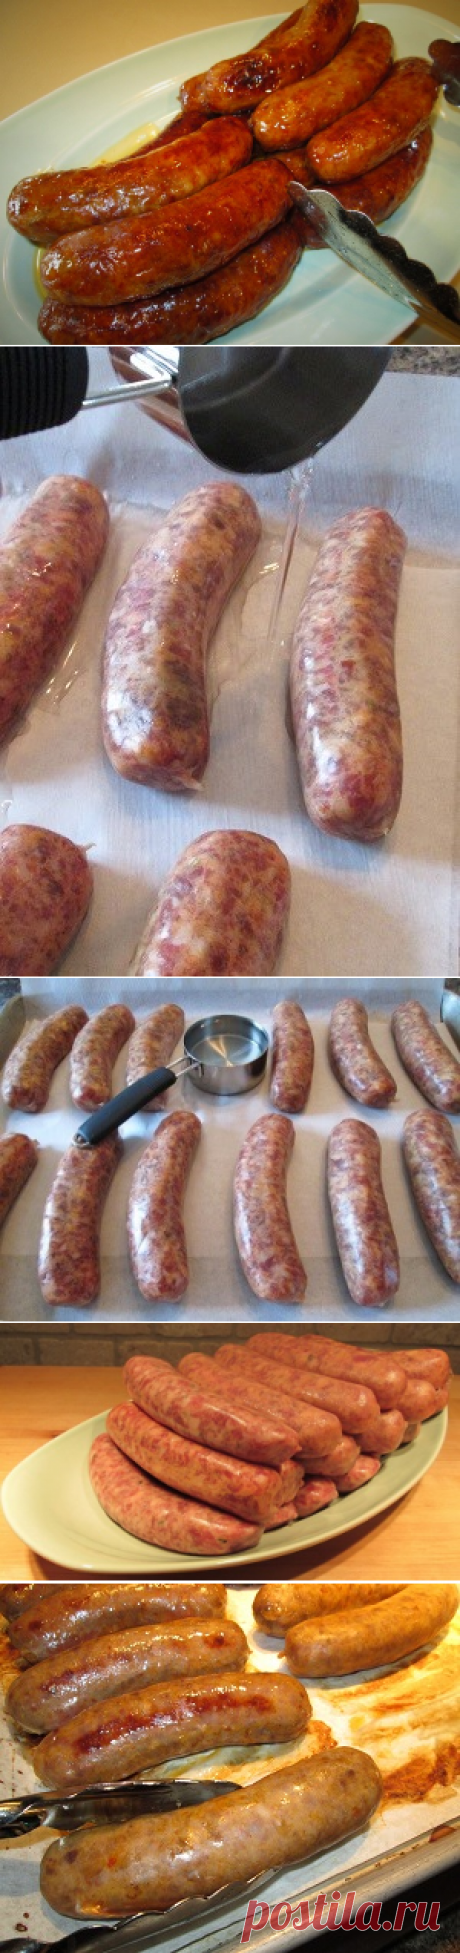 How To Cook Italian Sausage In An Oven | MikisPantryBlog